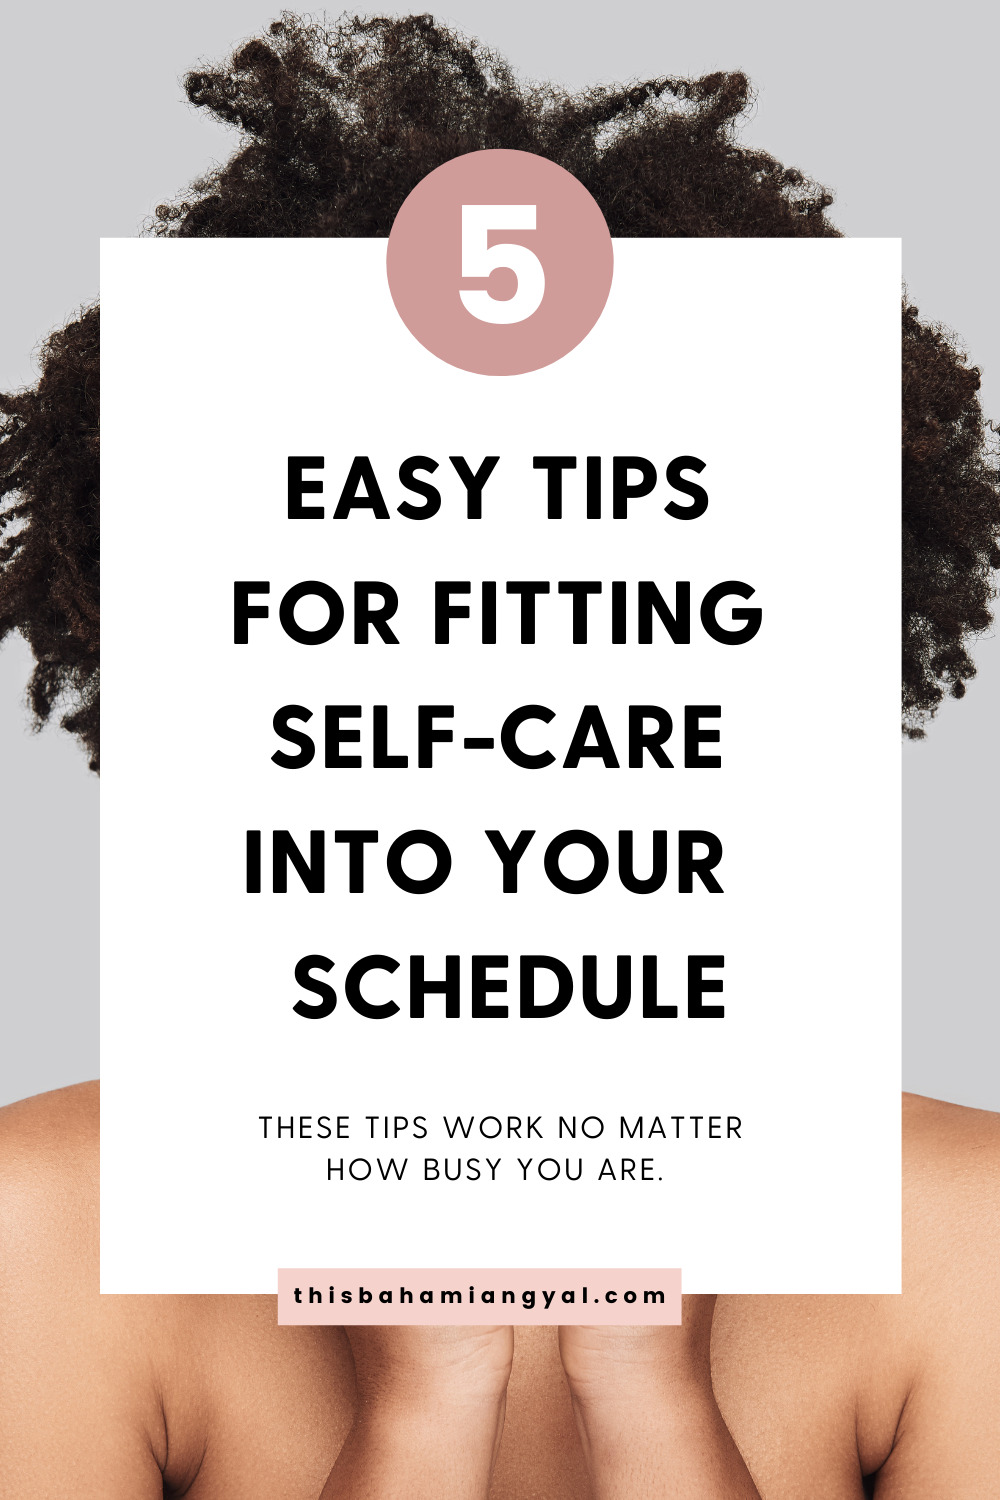 5 Easy Tips To Fit Self-Care Into Your Schedule